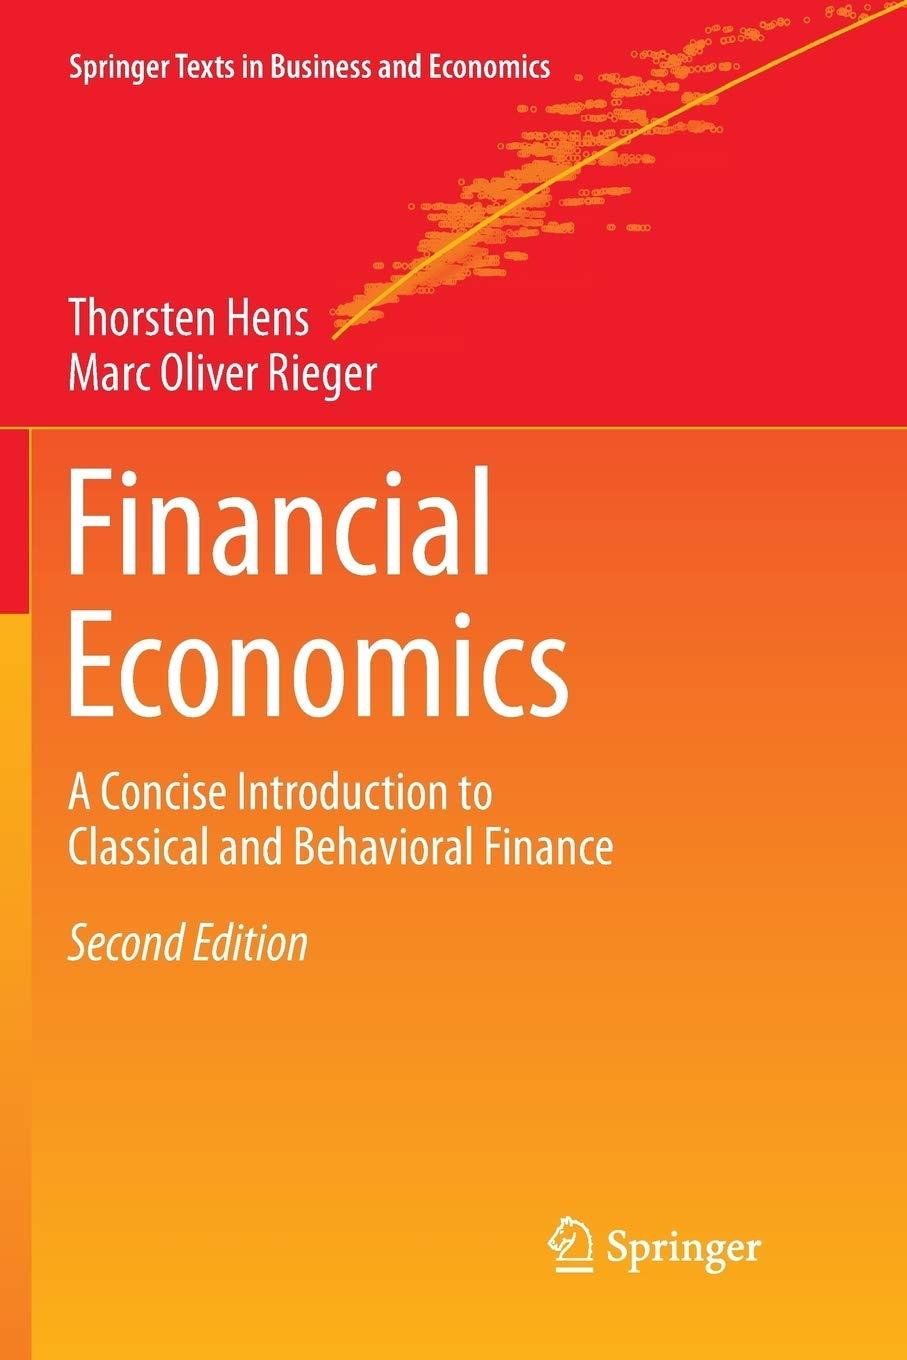 financial economics a concise introduction to classical and behavioral finance 1st edition thorsten hens,